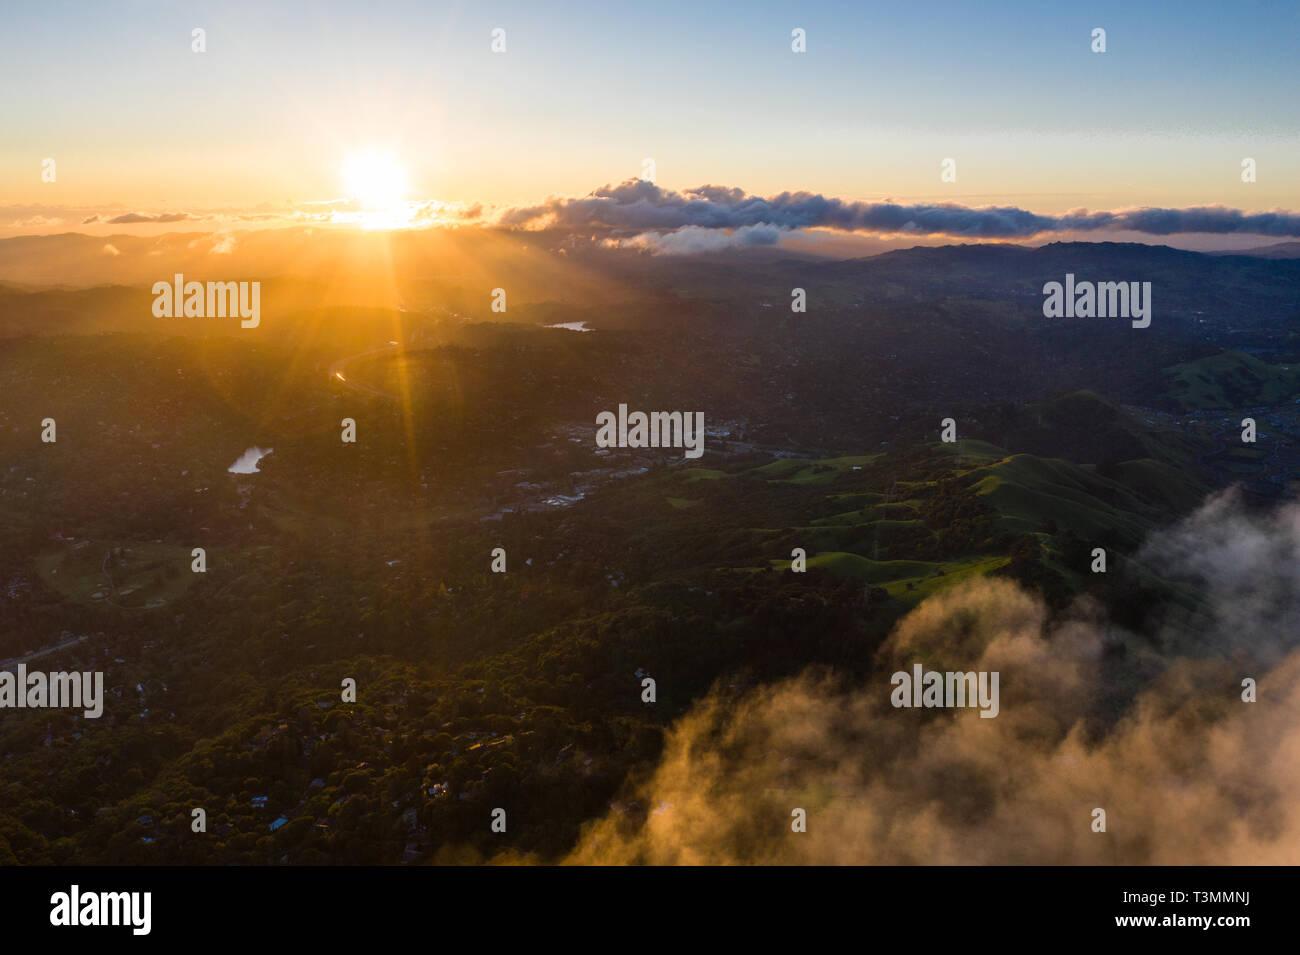 A beautiful sunrise illuminates the hills surrounding San Francisco Bay in Northern California. This area is often covered by a thick marine layer. Stock Photo